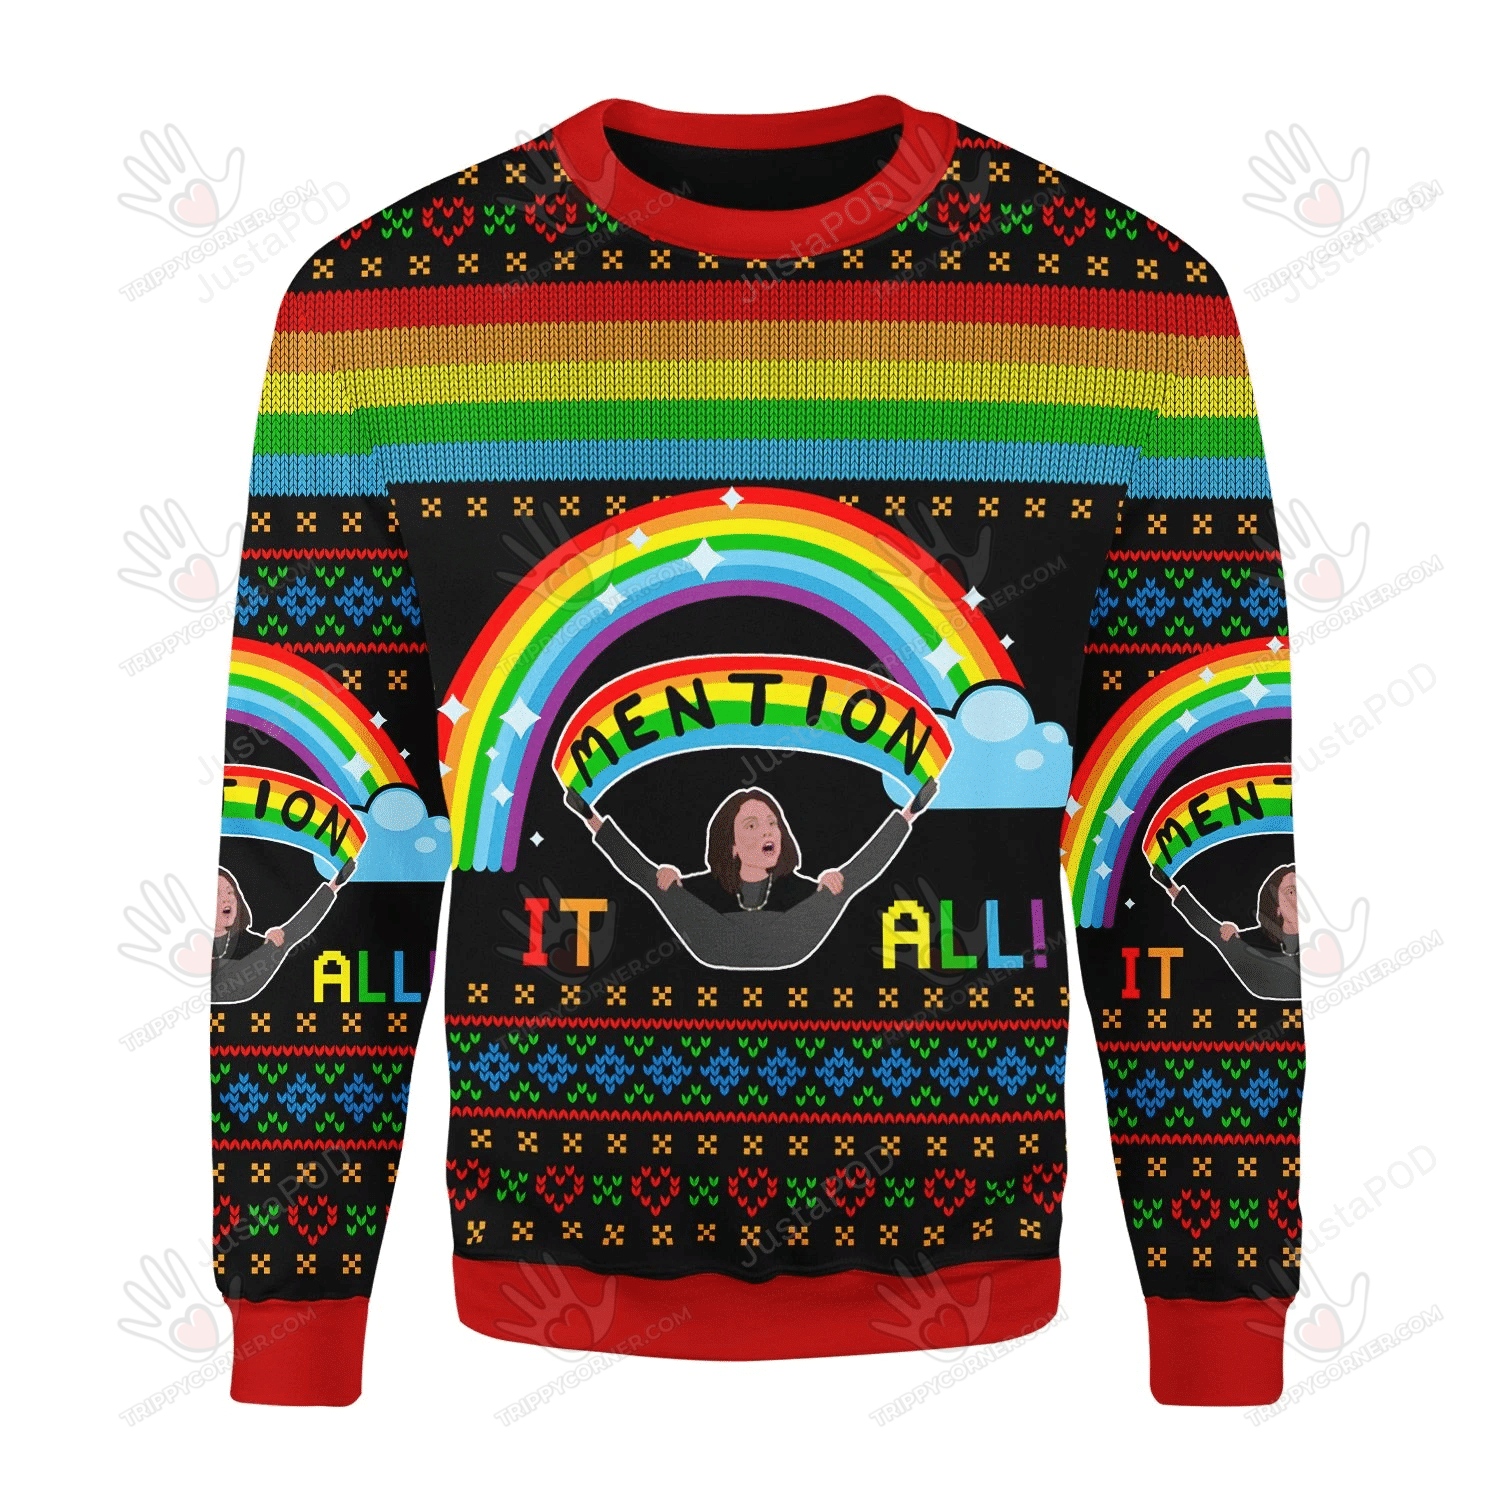 Mention It All Ugly Christmas Sweater, All Over Print Sweatshirt, Ugly Sweater Christmas Gift